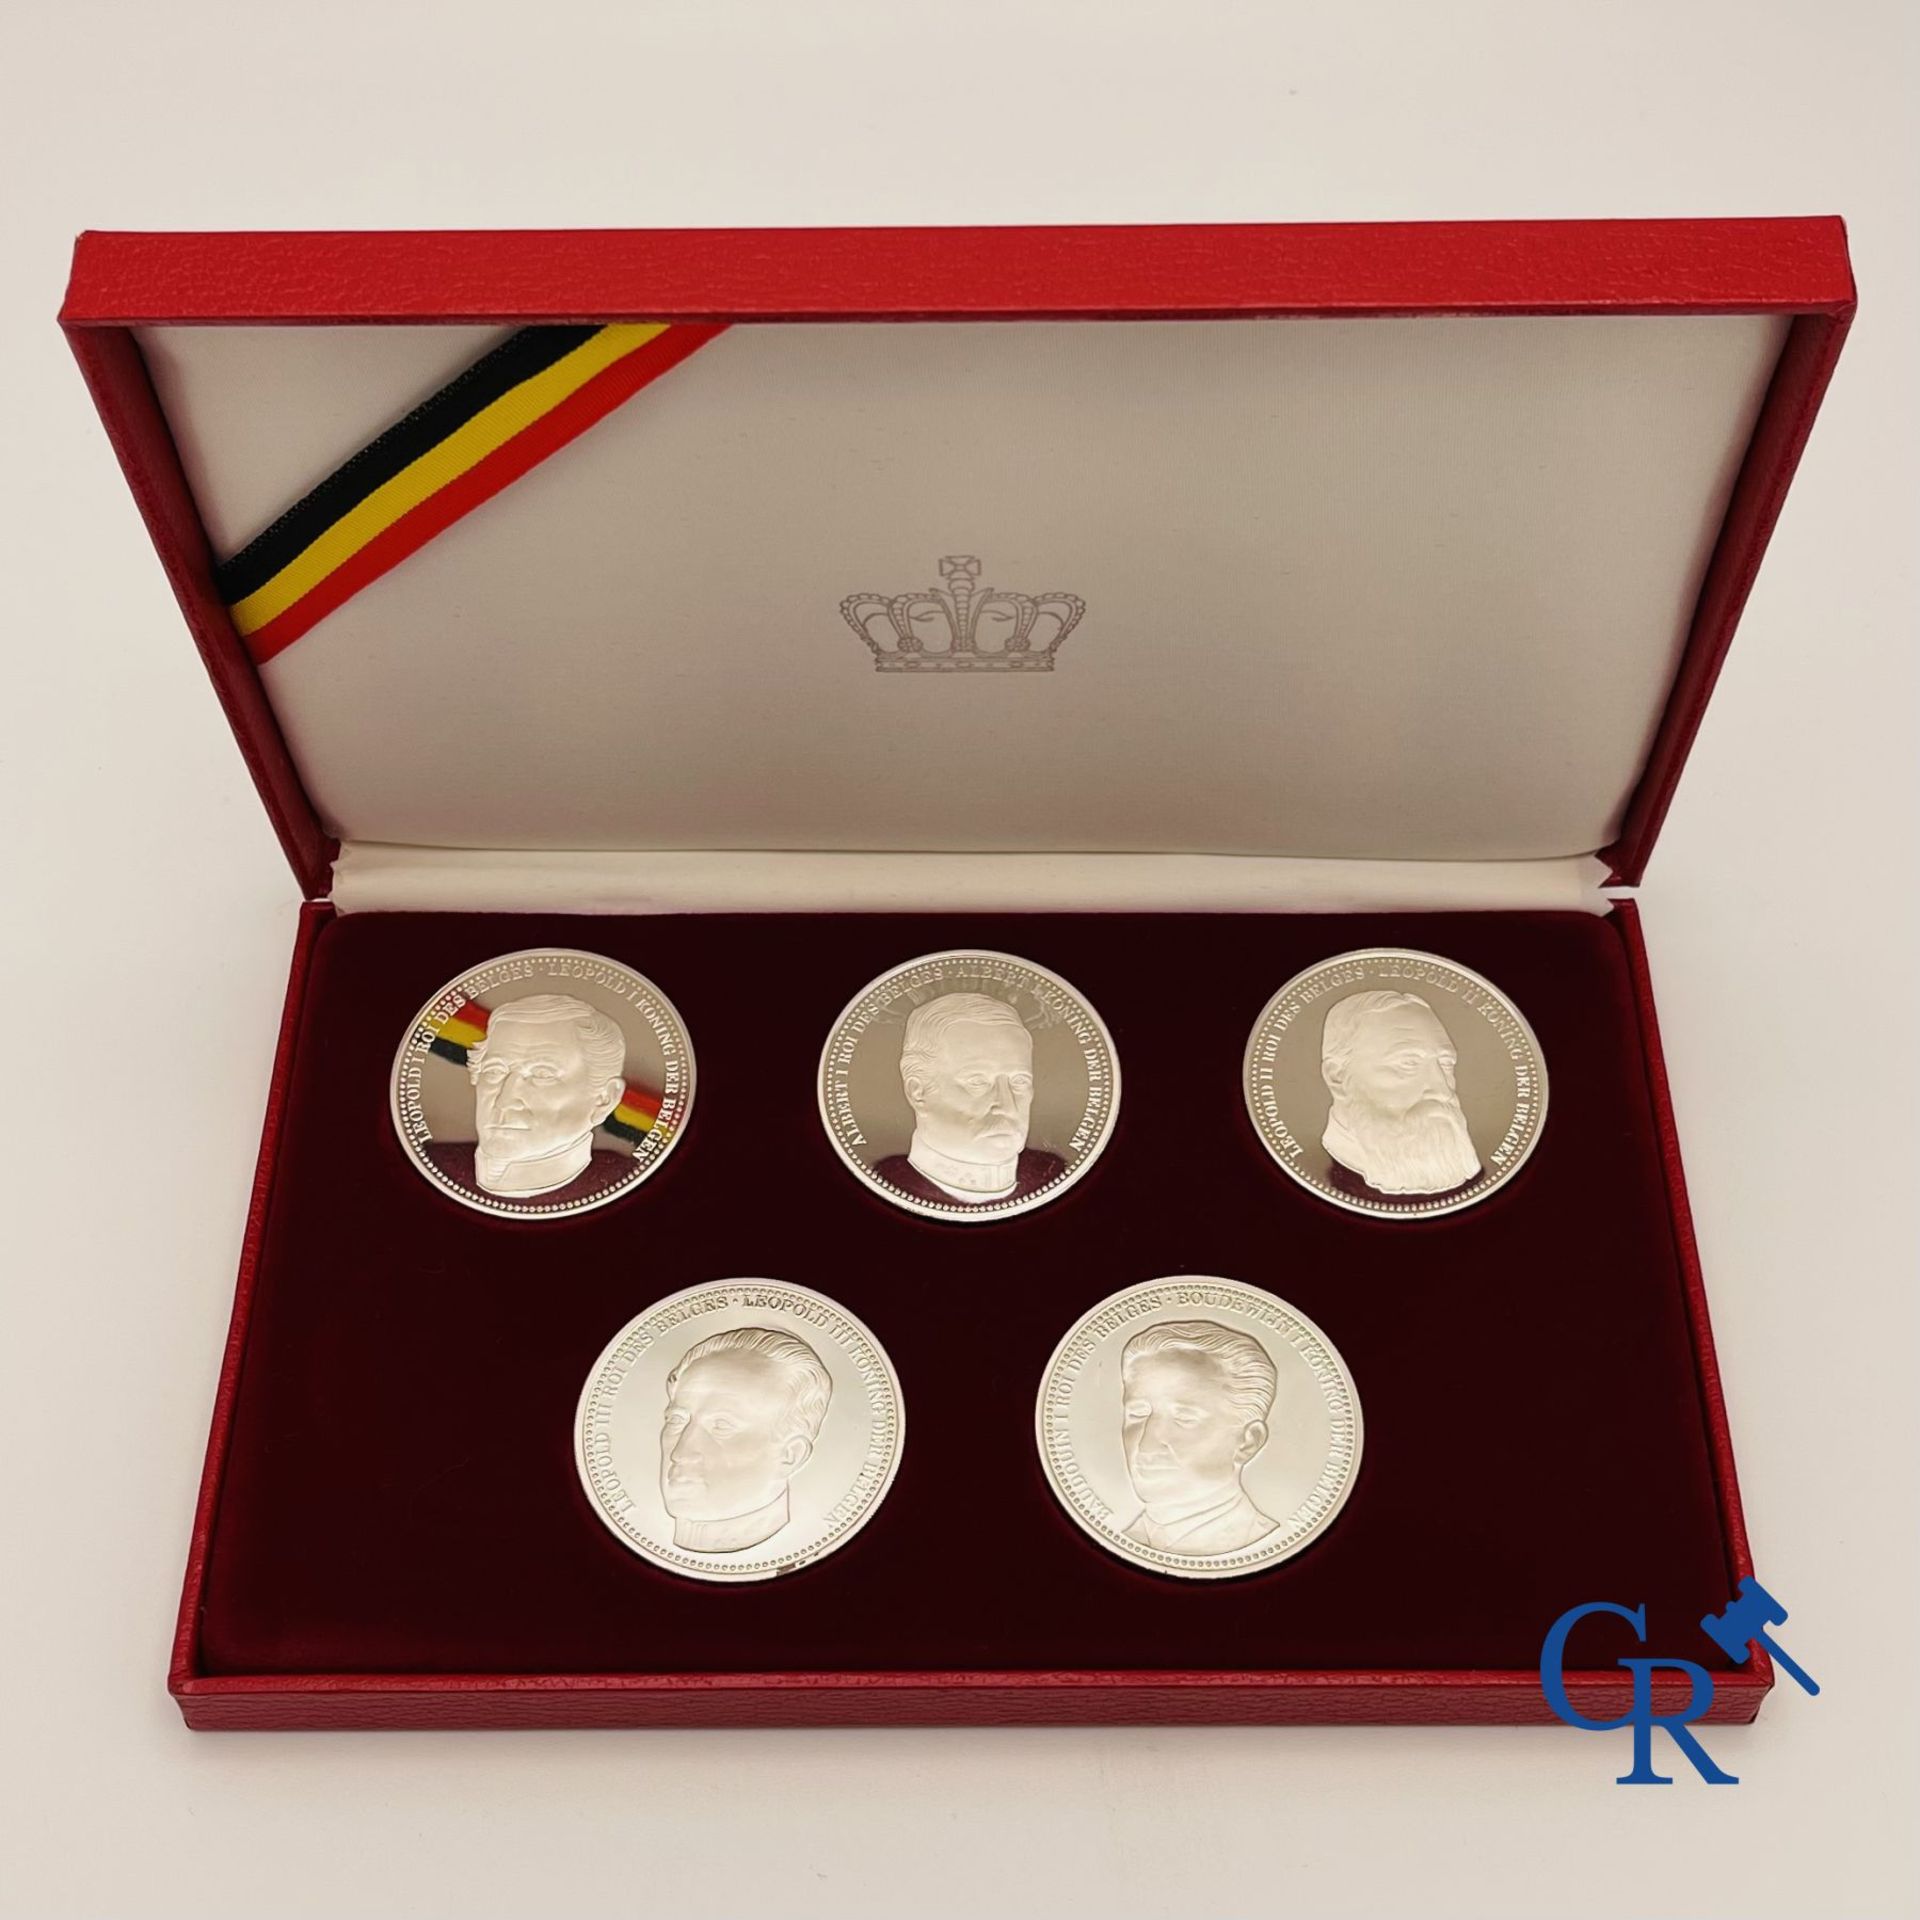 Sterling silver: Commemorative medals: 10 Portrait tokens of the kings and queens of Belgium. - Image 3 of 6